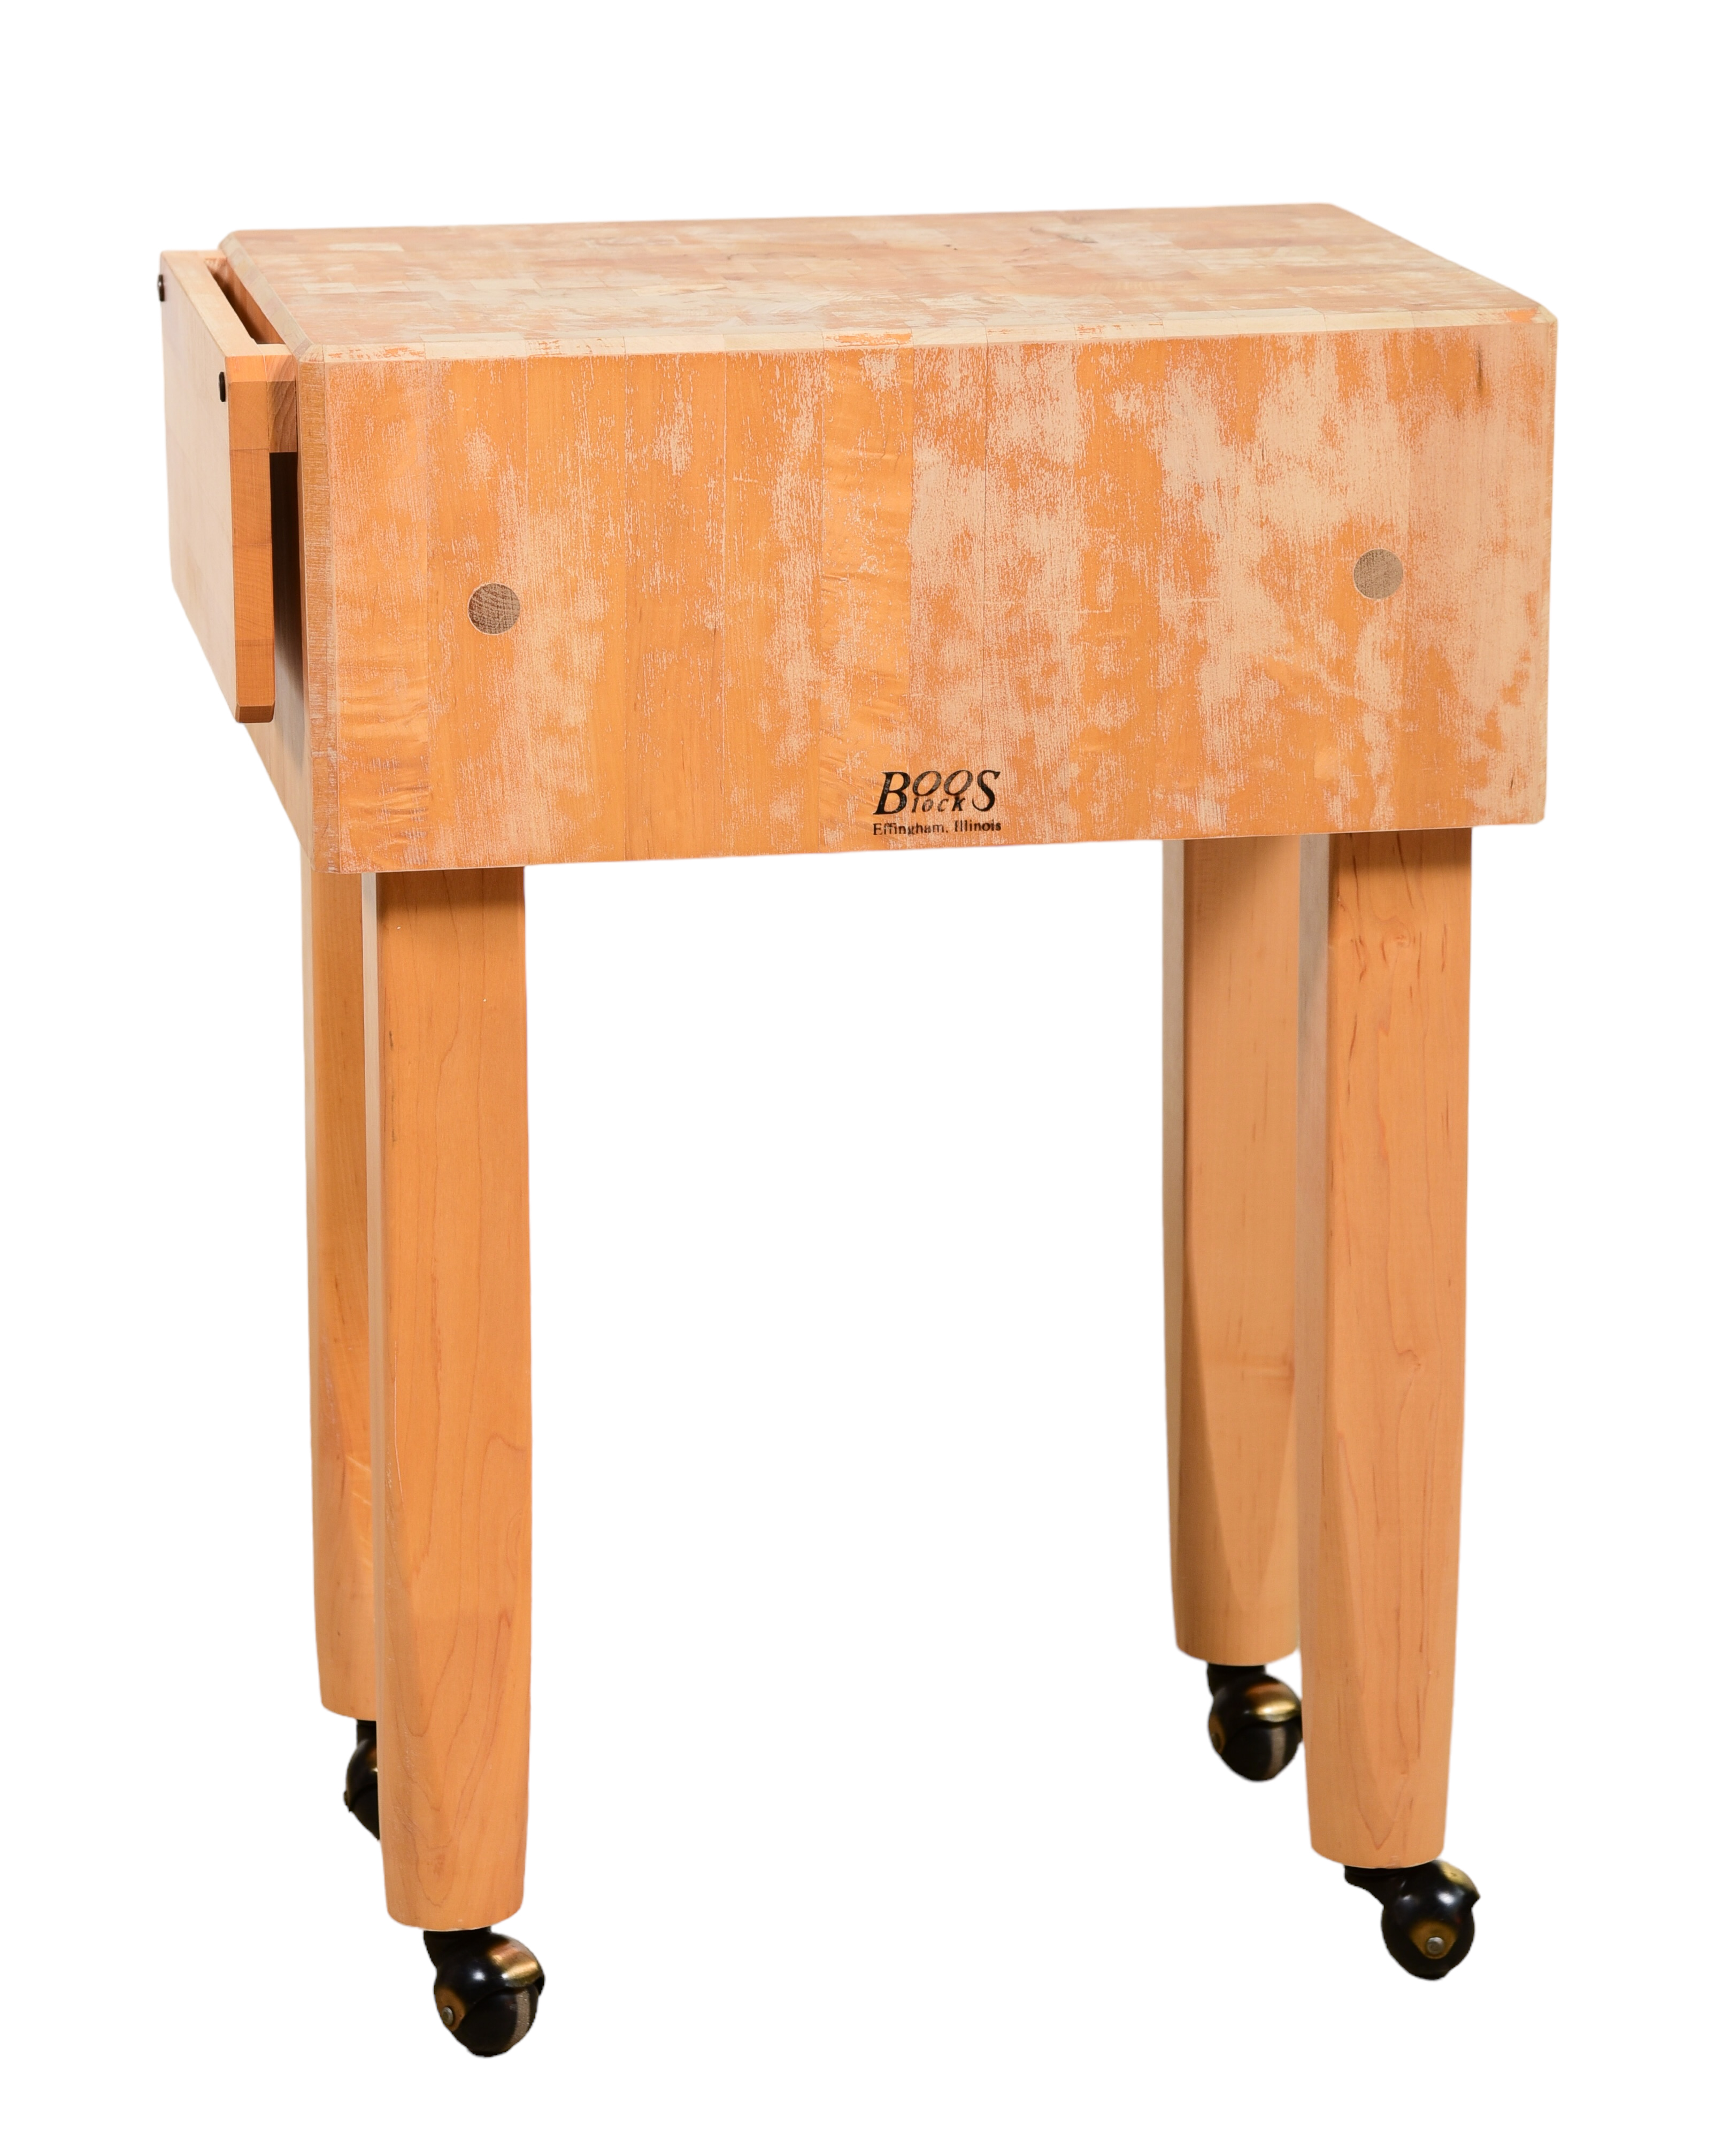 Boos butcher block, marked on side,